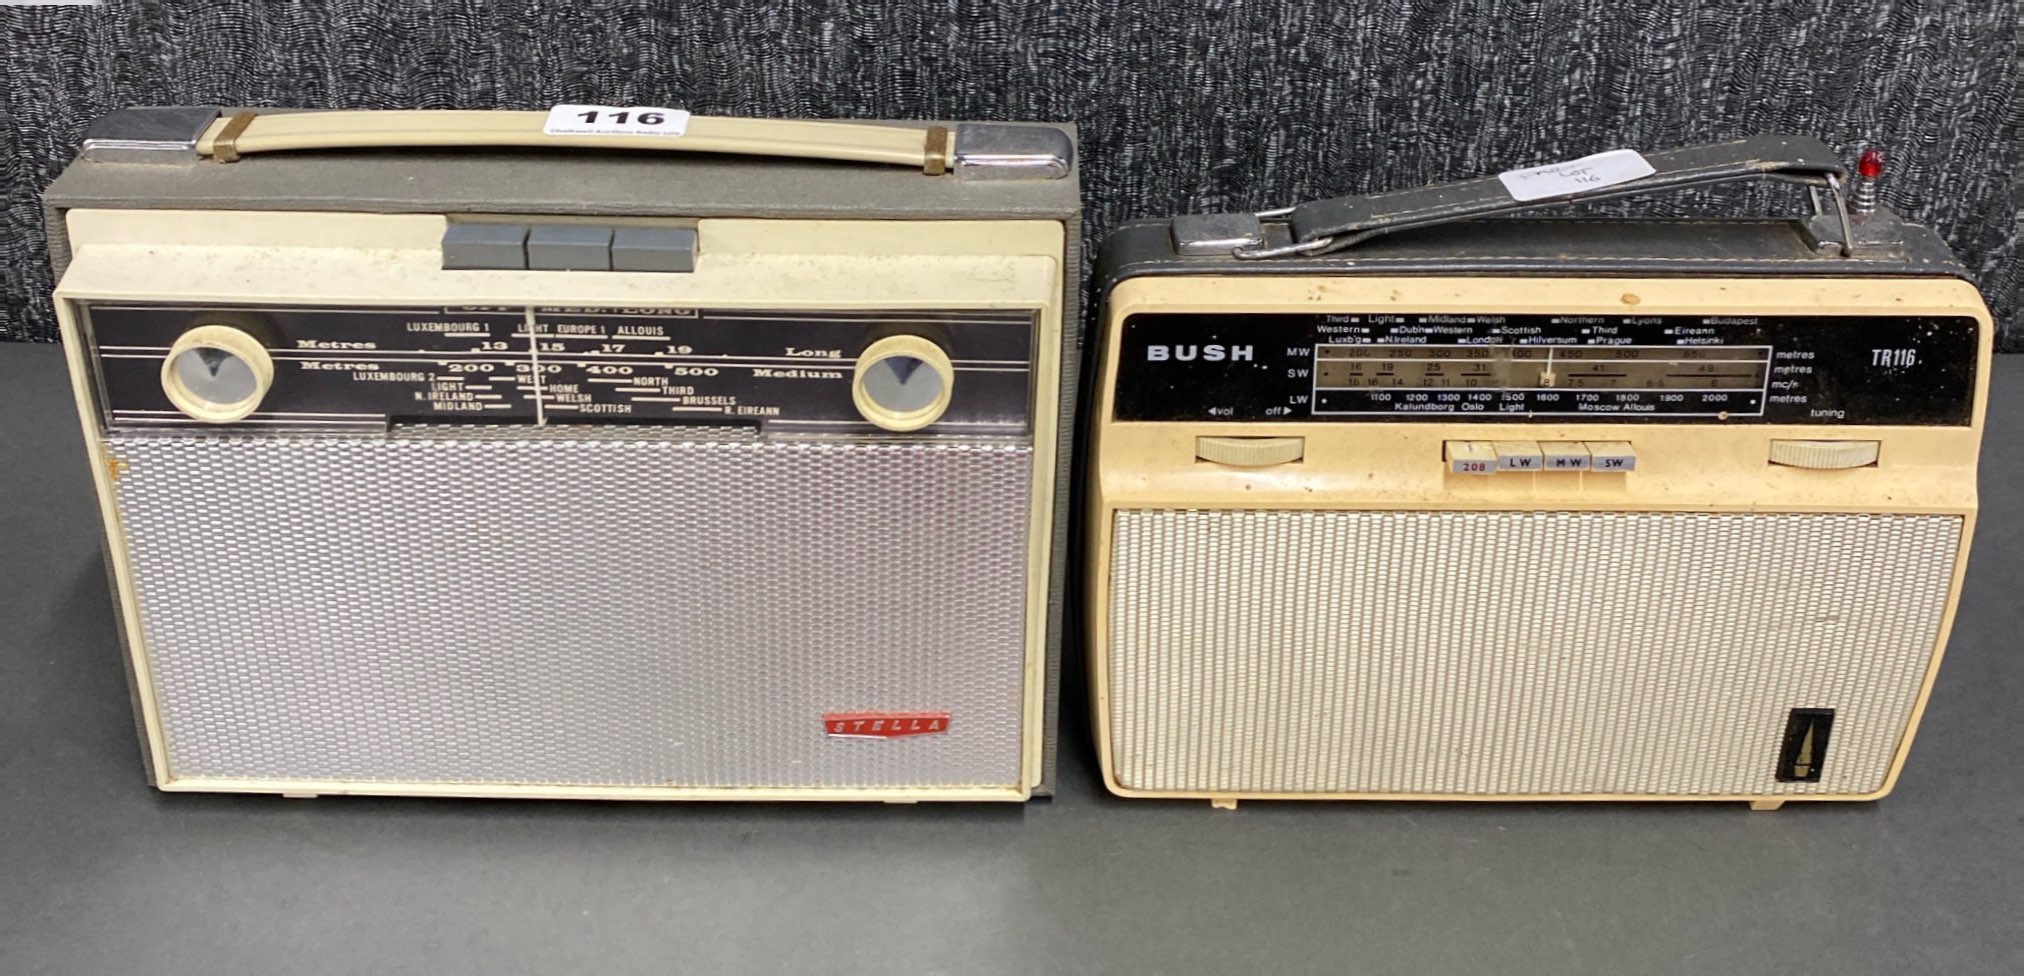 A Bush TR116 together with a further Stella portable transistor radio.